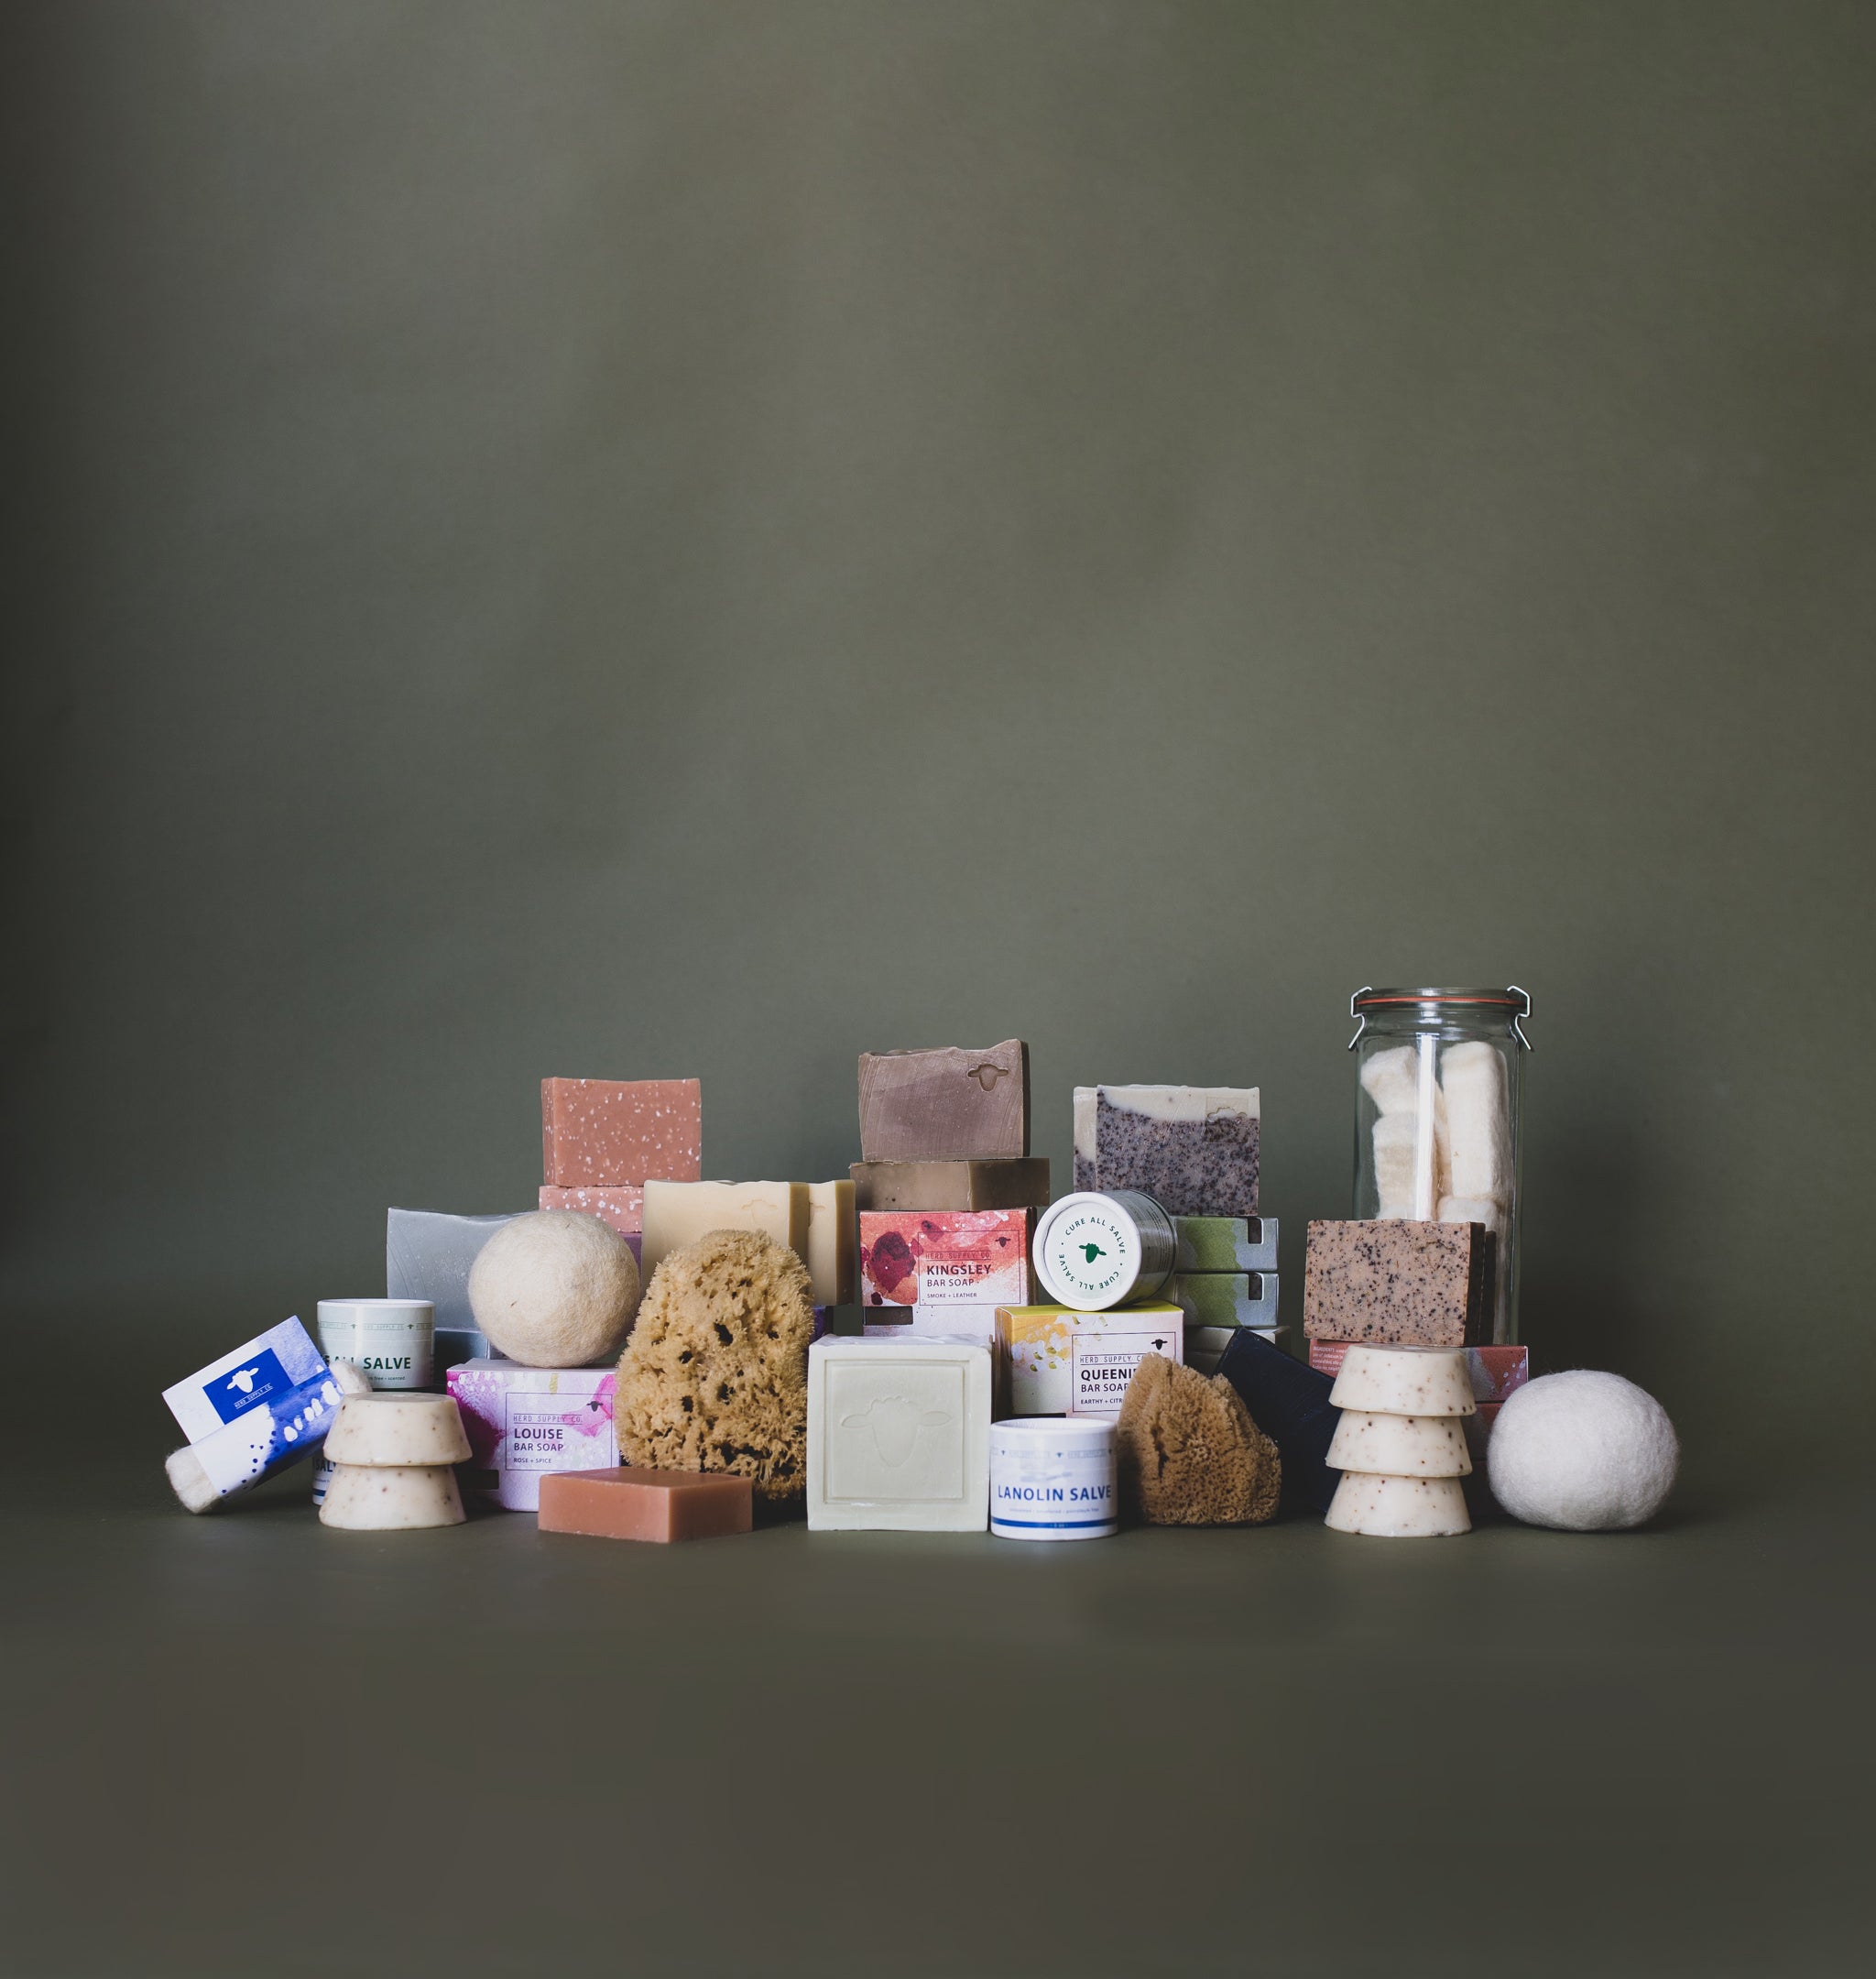 Herd Supply Co Soap, Shampoo, Lanolin, and Dryer Ball Group Shot